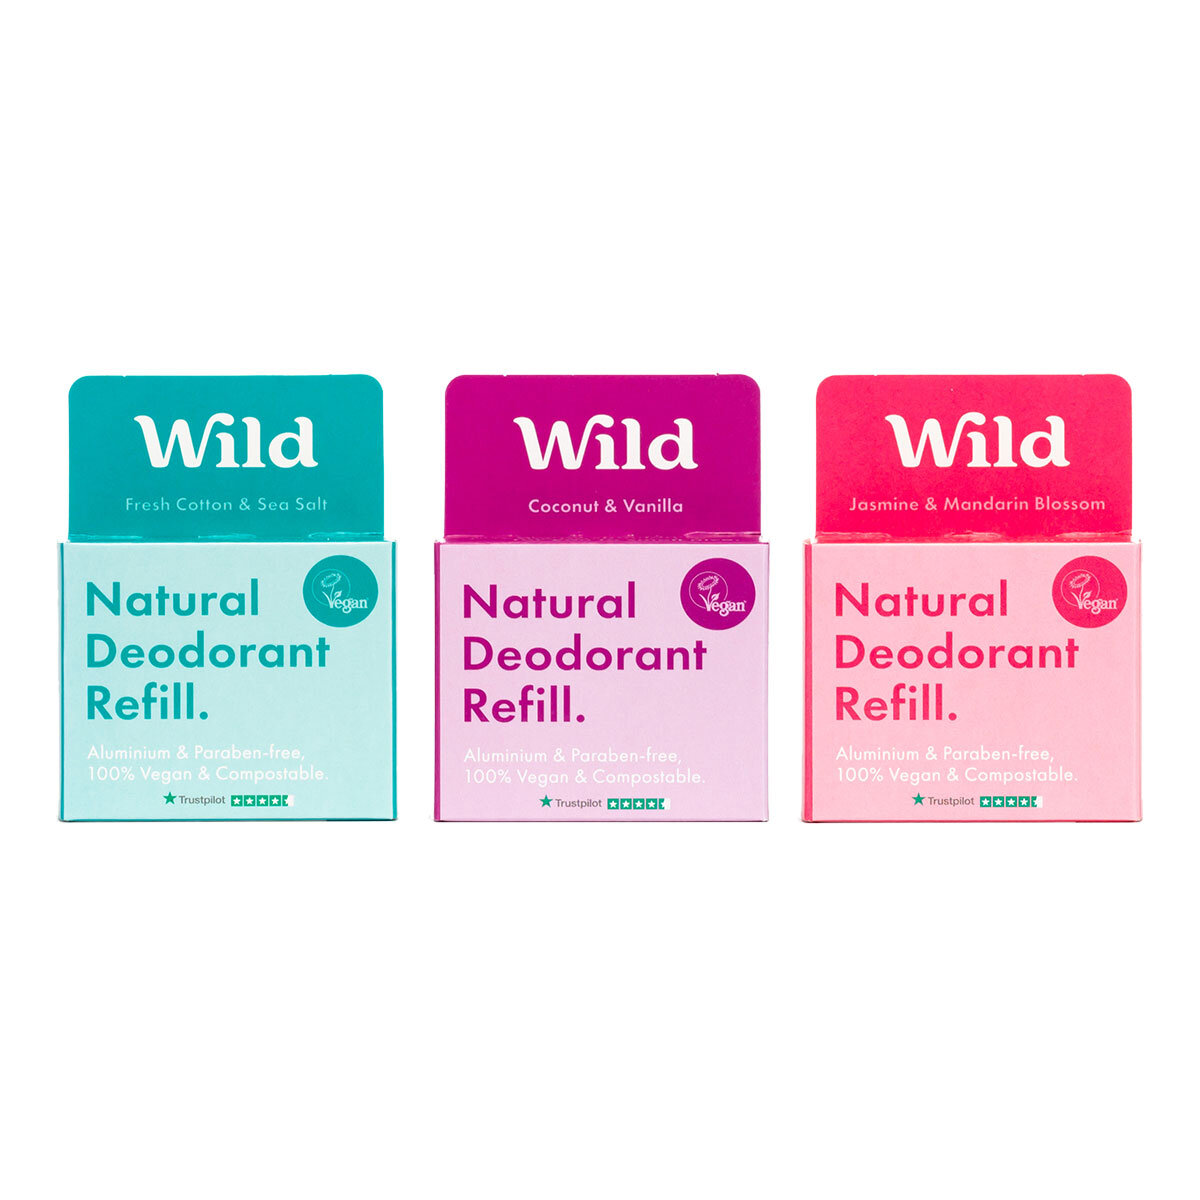 Wild Mixed Fragrance Deodorant Refill Multipack, 3 Pack 